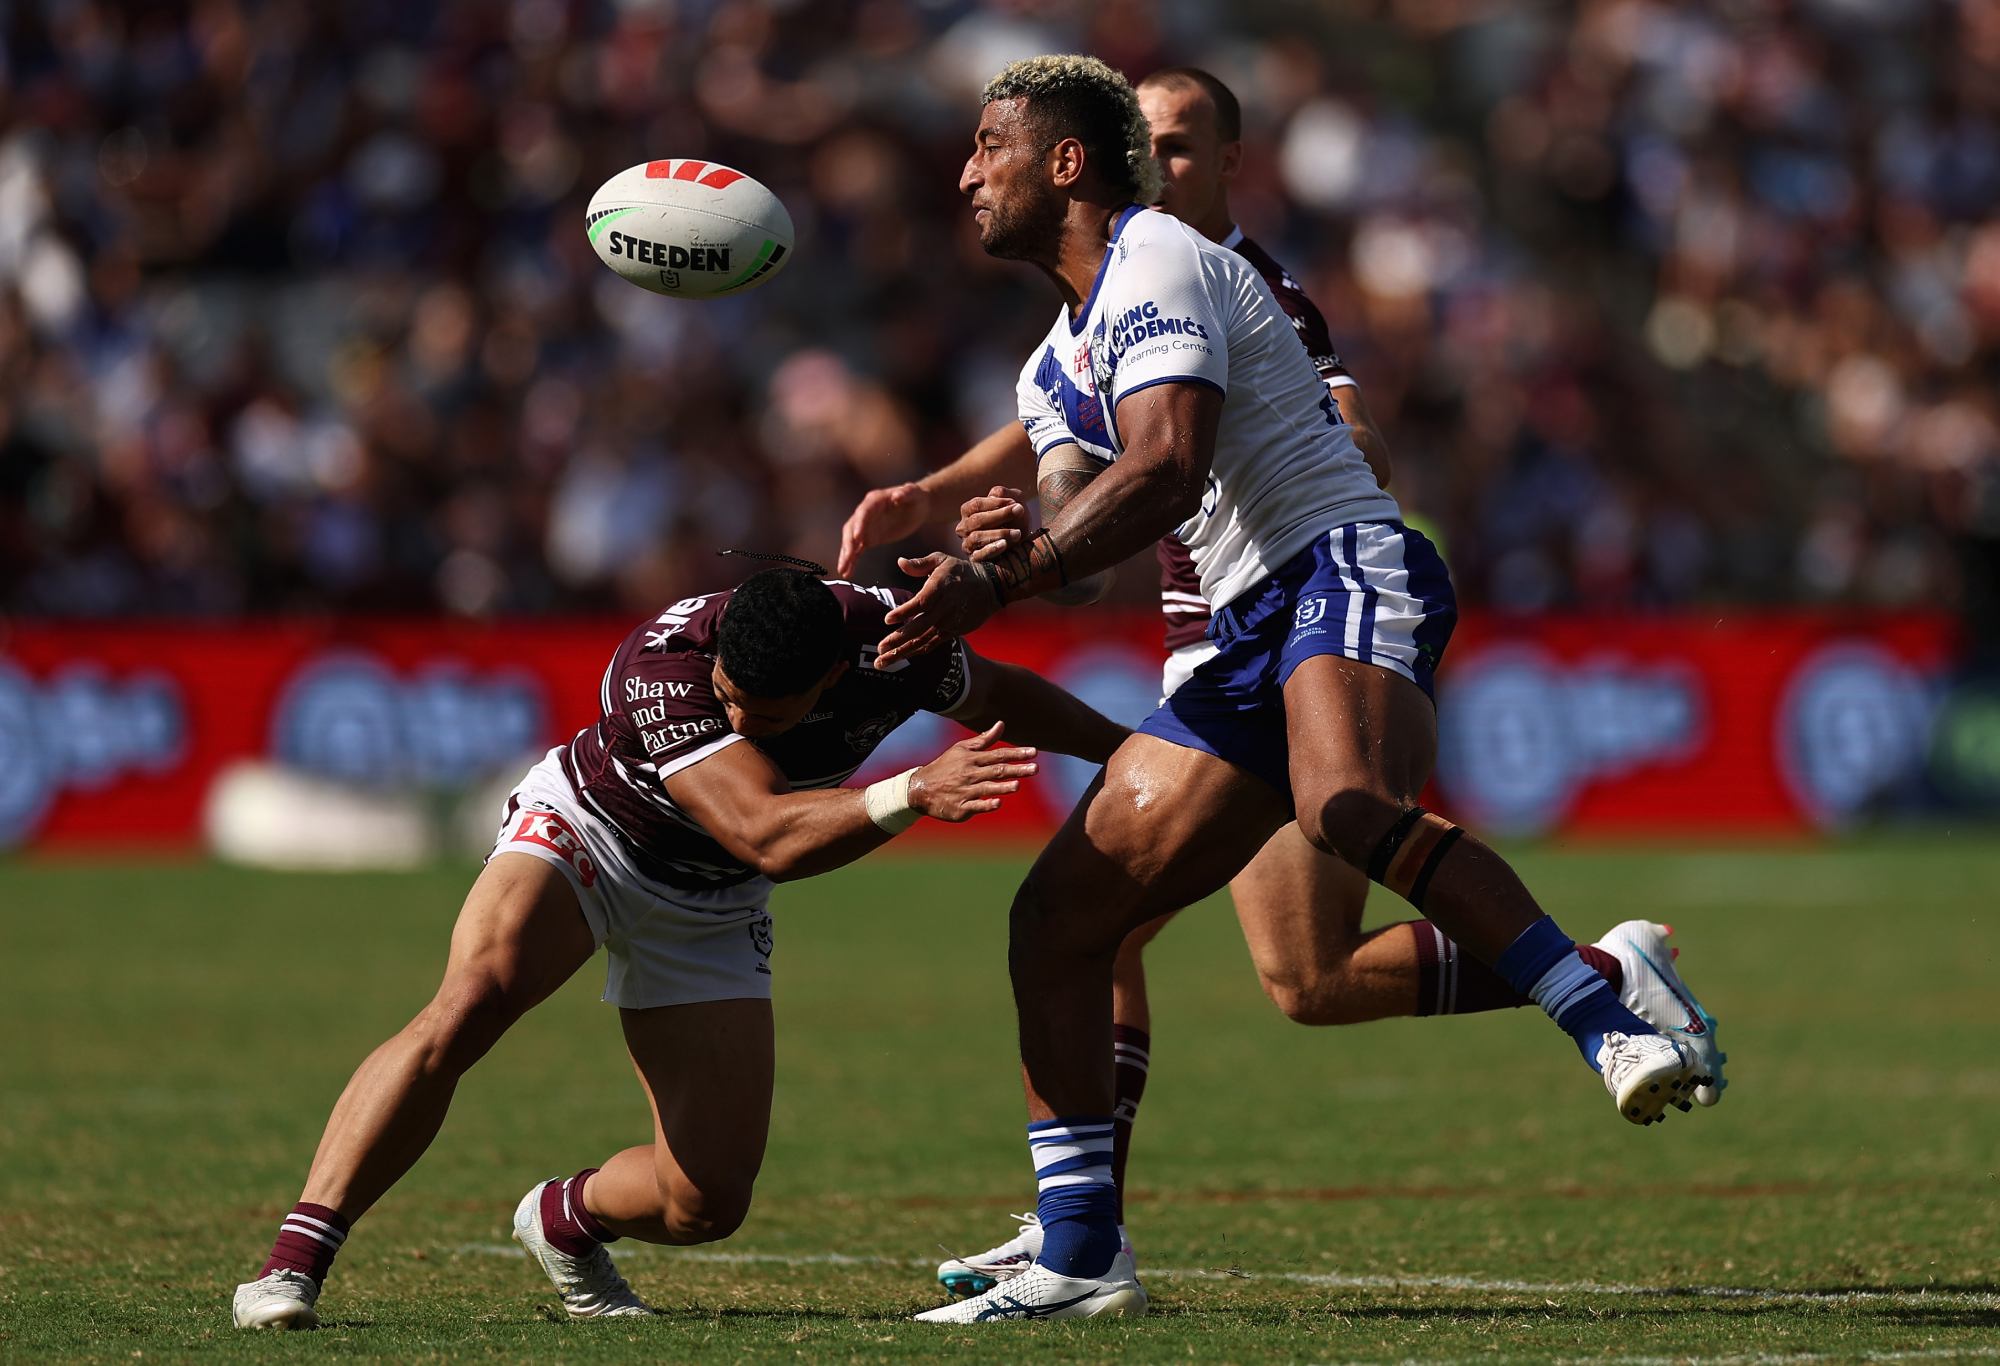 SYDNEY, AUSTRALIA - MARCH 04: Viliame Kikau of the Bulldogs is tackled during the round one NRL match between the Manly Sea Eagles and the Canterbury Bulldogs at 4 Pines Park on March 04, 2023 in Sydney, Australia. (Photo by Cameron Spencer/Getty Images)